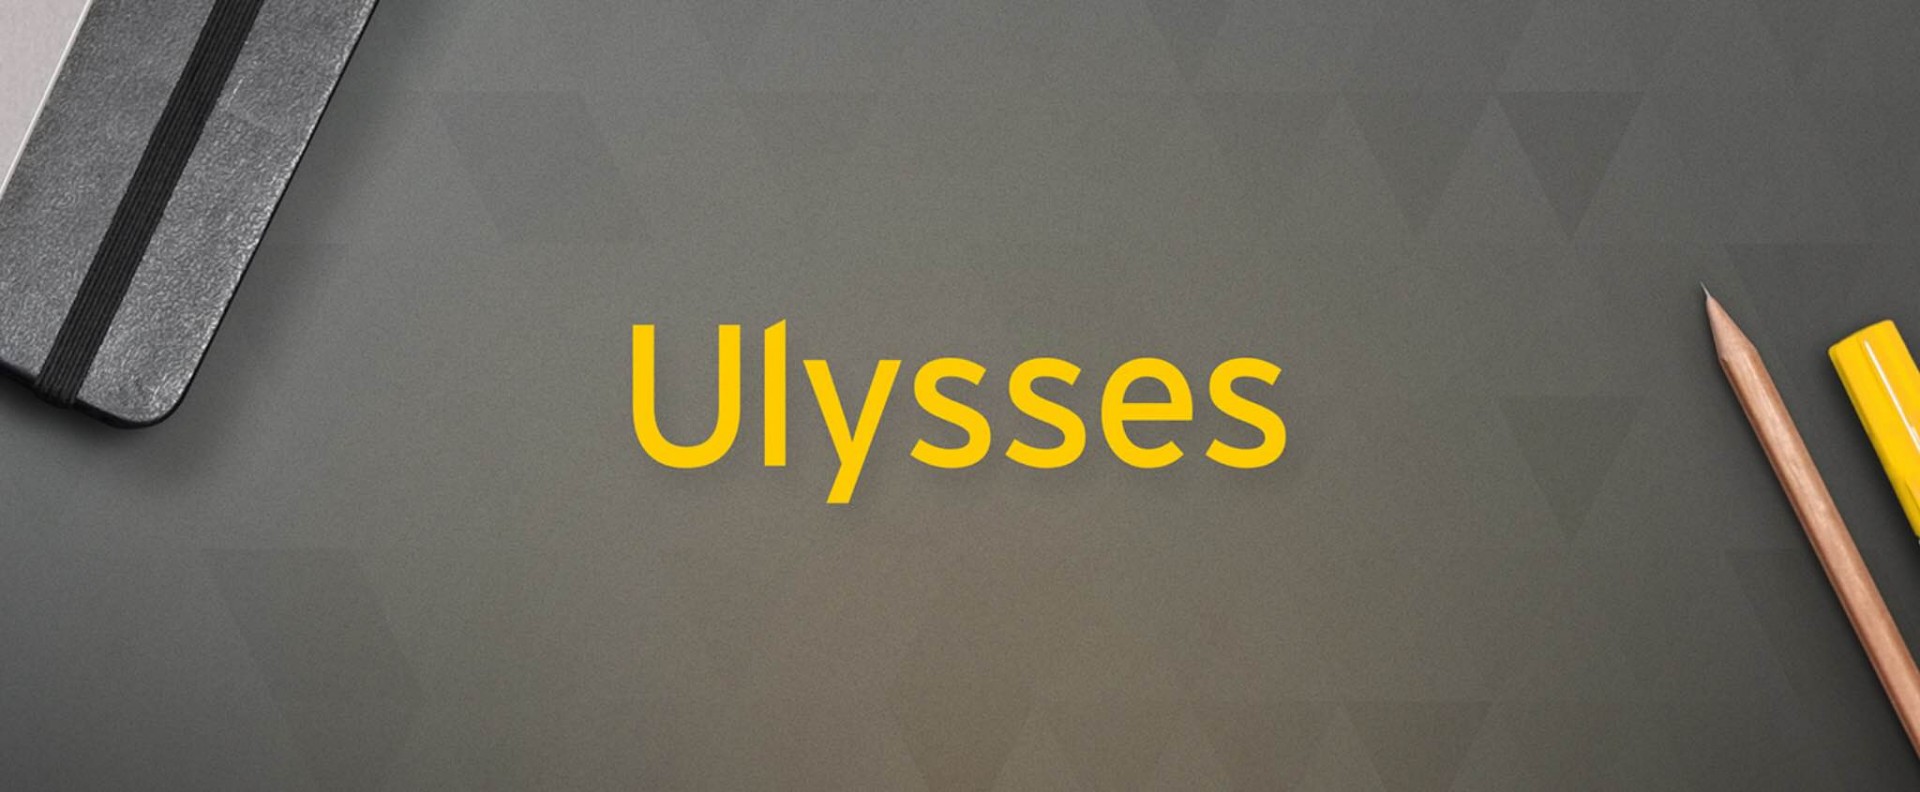 app-subscriptions-worth-paying-for-ulysses